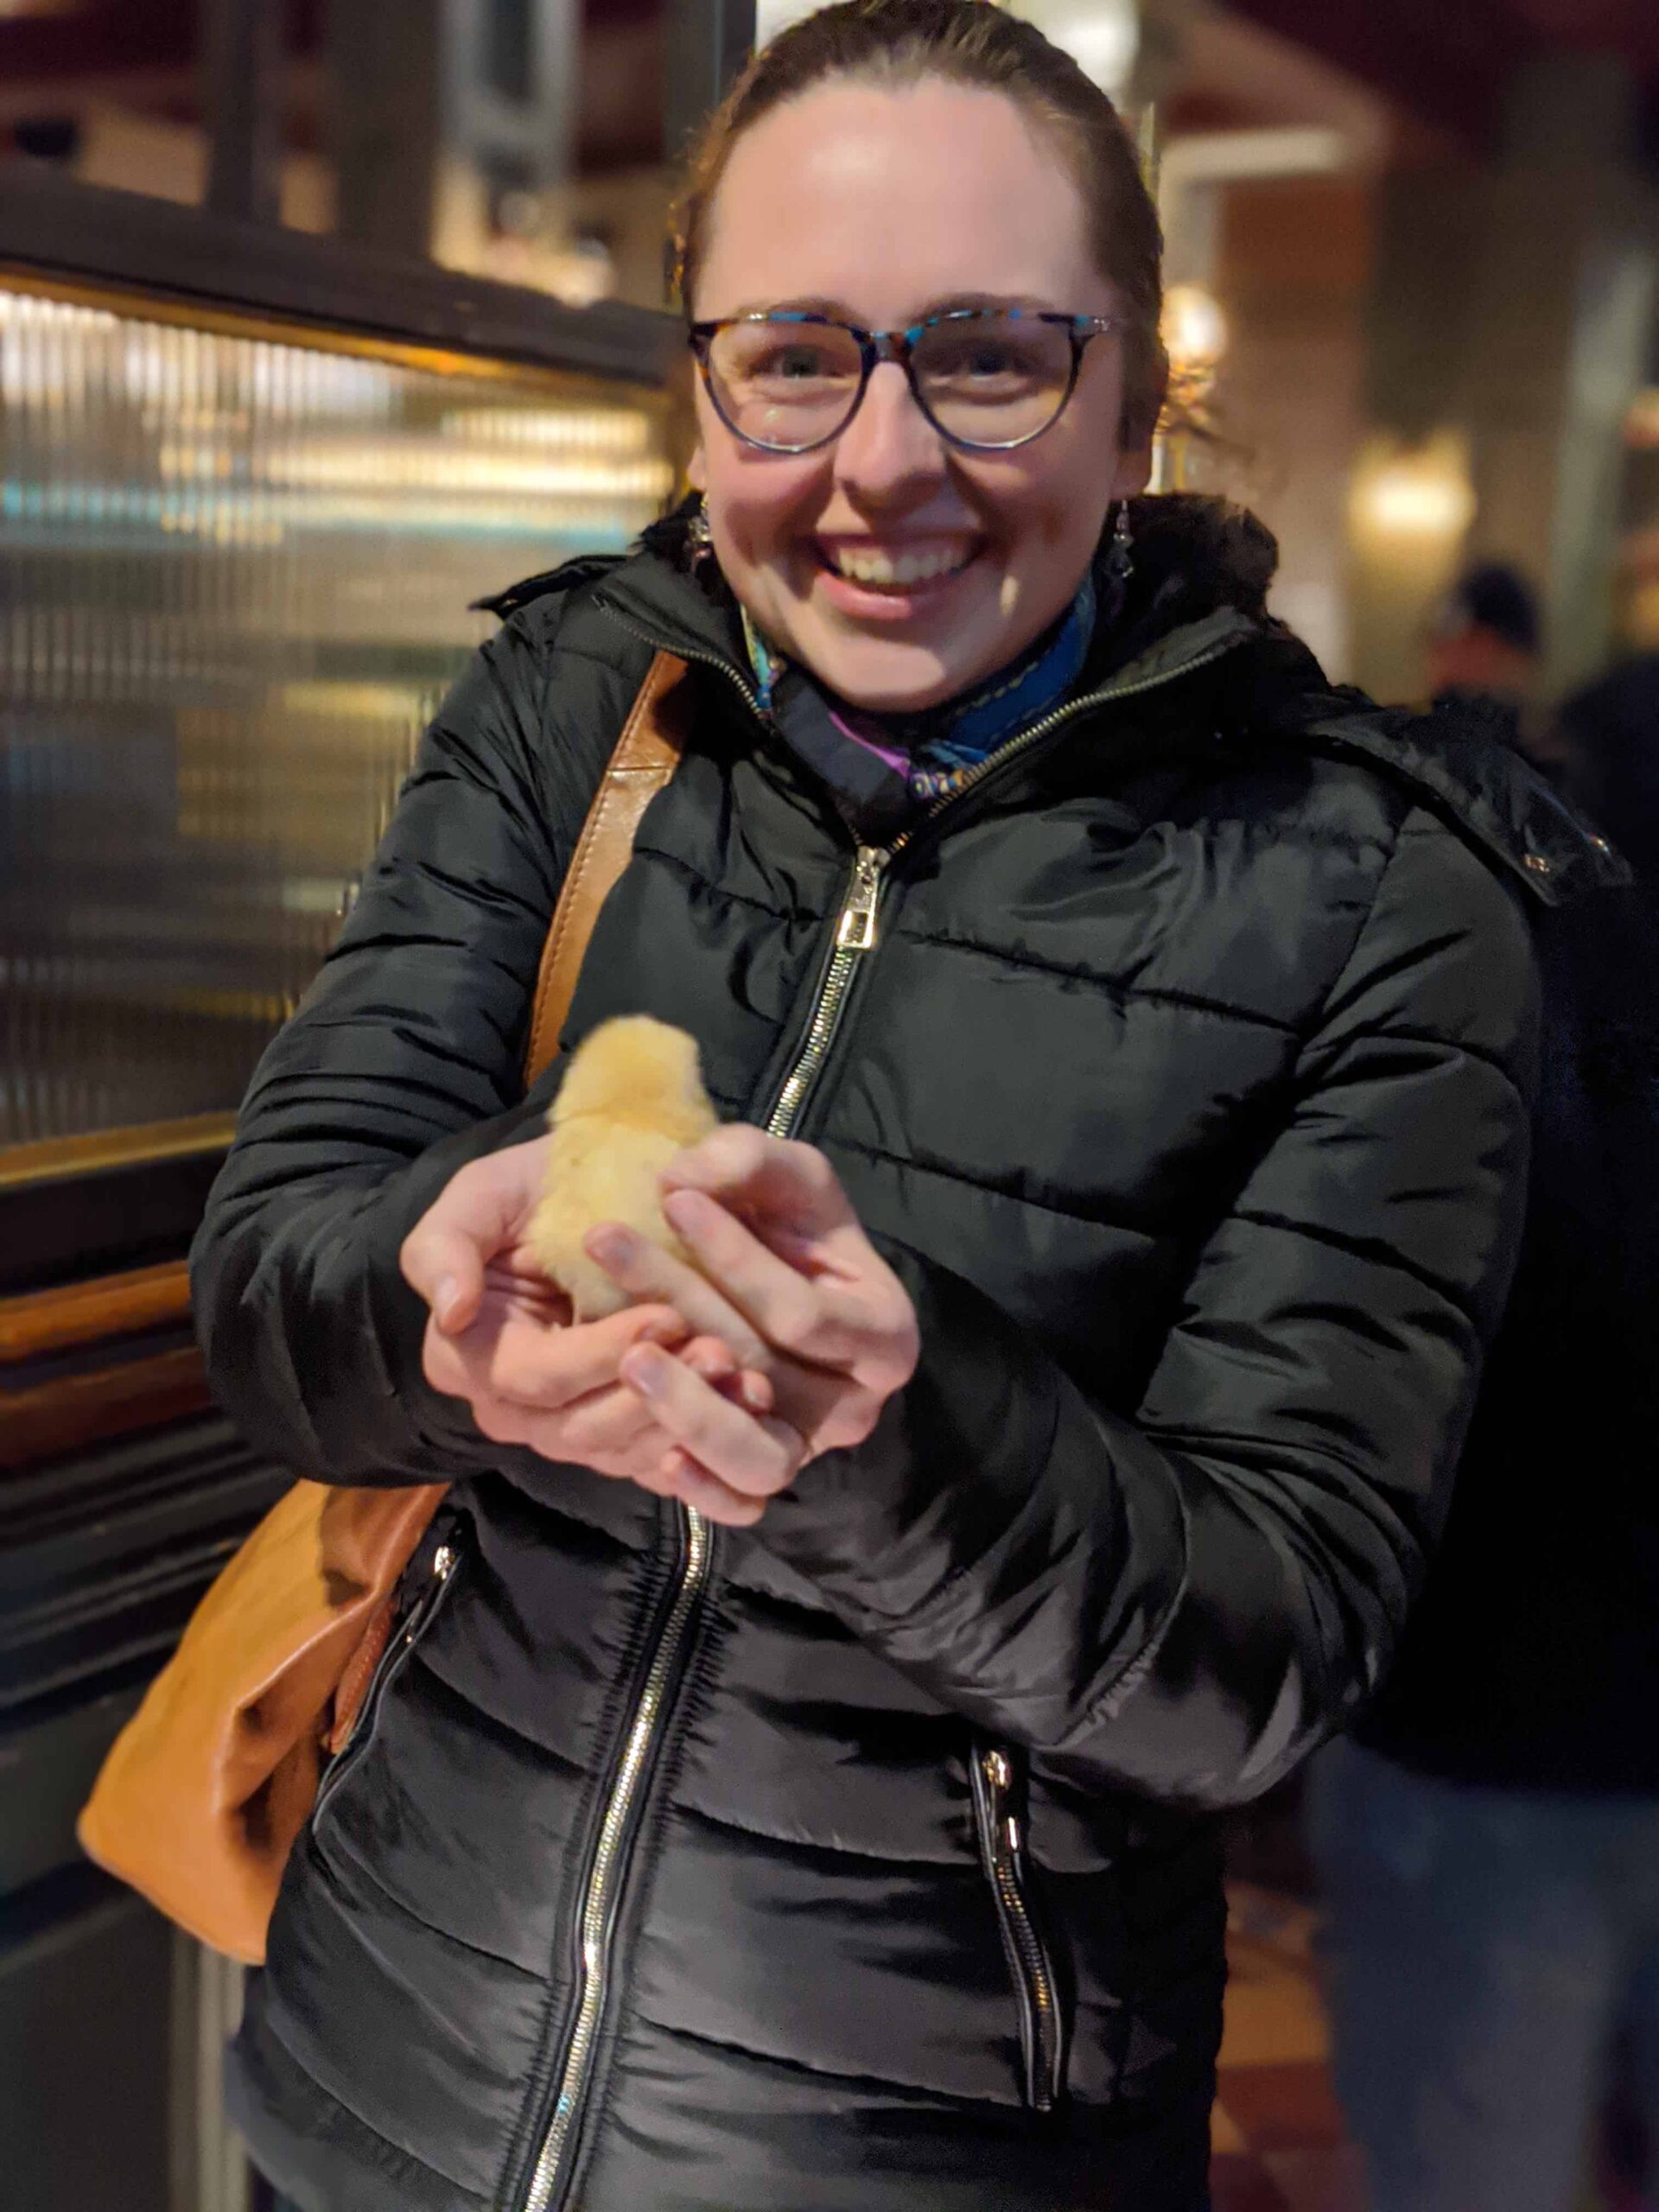 Zoe beams with happiness holding a baby chick